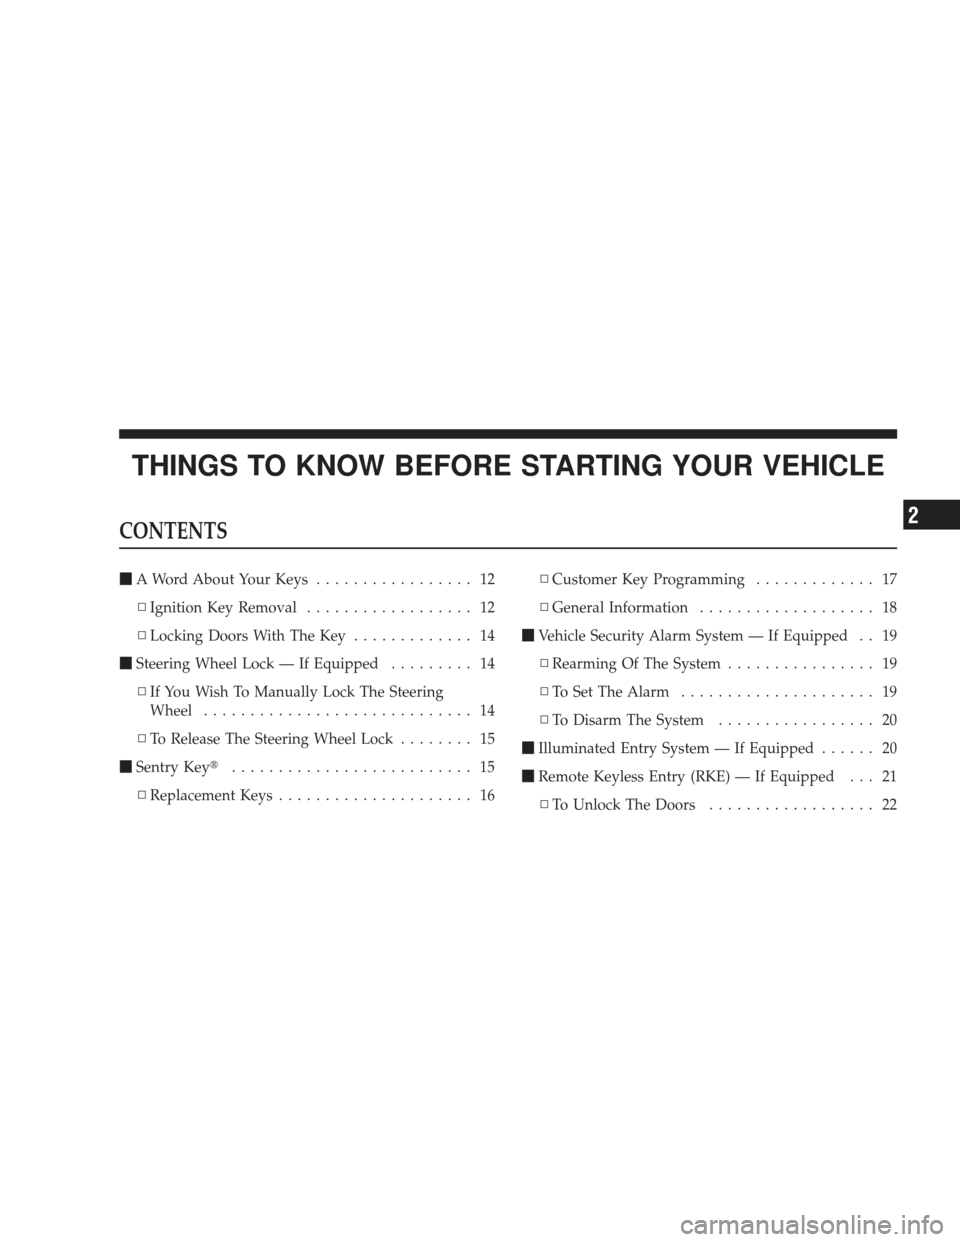 DODGE RAM 4500 CHASSIS CAB 2009 4.G User Guide THINGS TO KNOW BEFORE STARTING YOUR VEHICLE
CONTENTS
A Word About Your Keys ................. 12
▫ Ignition Key Removal .................. 12
▫ Locking Doors With The Key ............. 14
 Steer